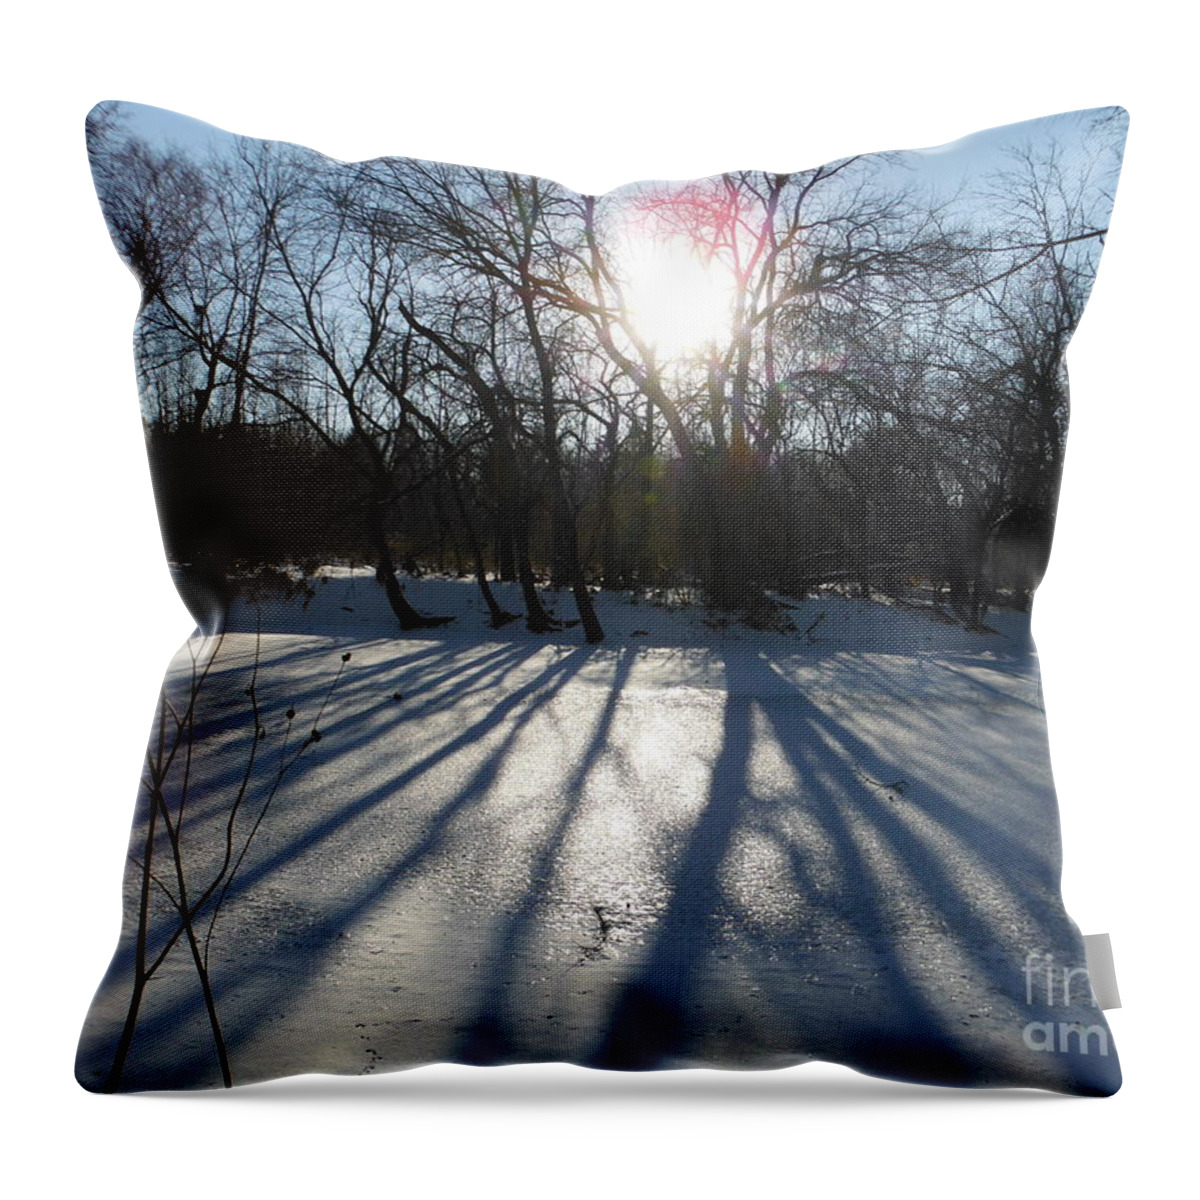 Big Darby Creek 1 Throw Pillow featuring the photograph Big Darby Creek 1 by Paddy Shaffer